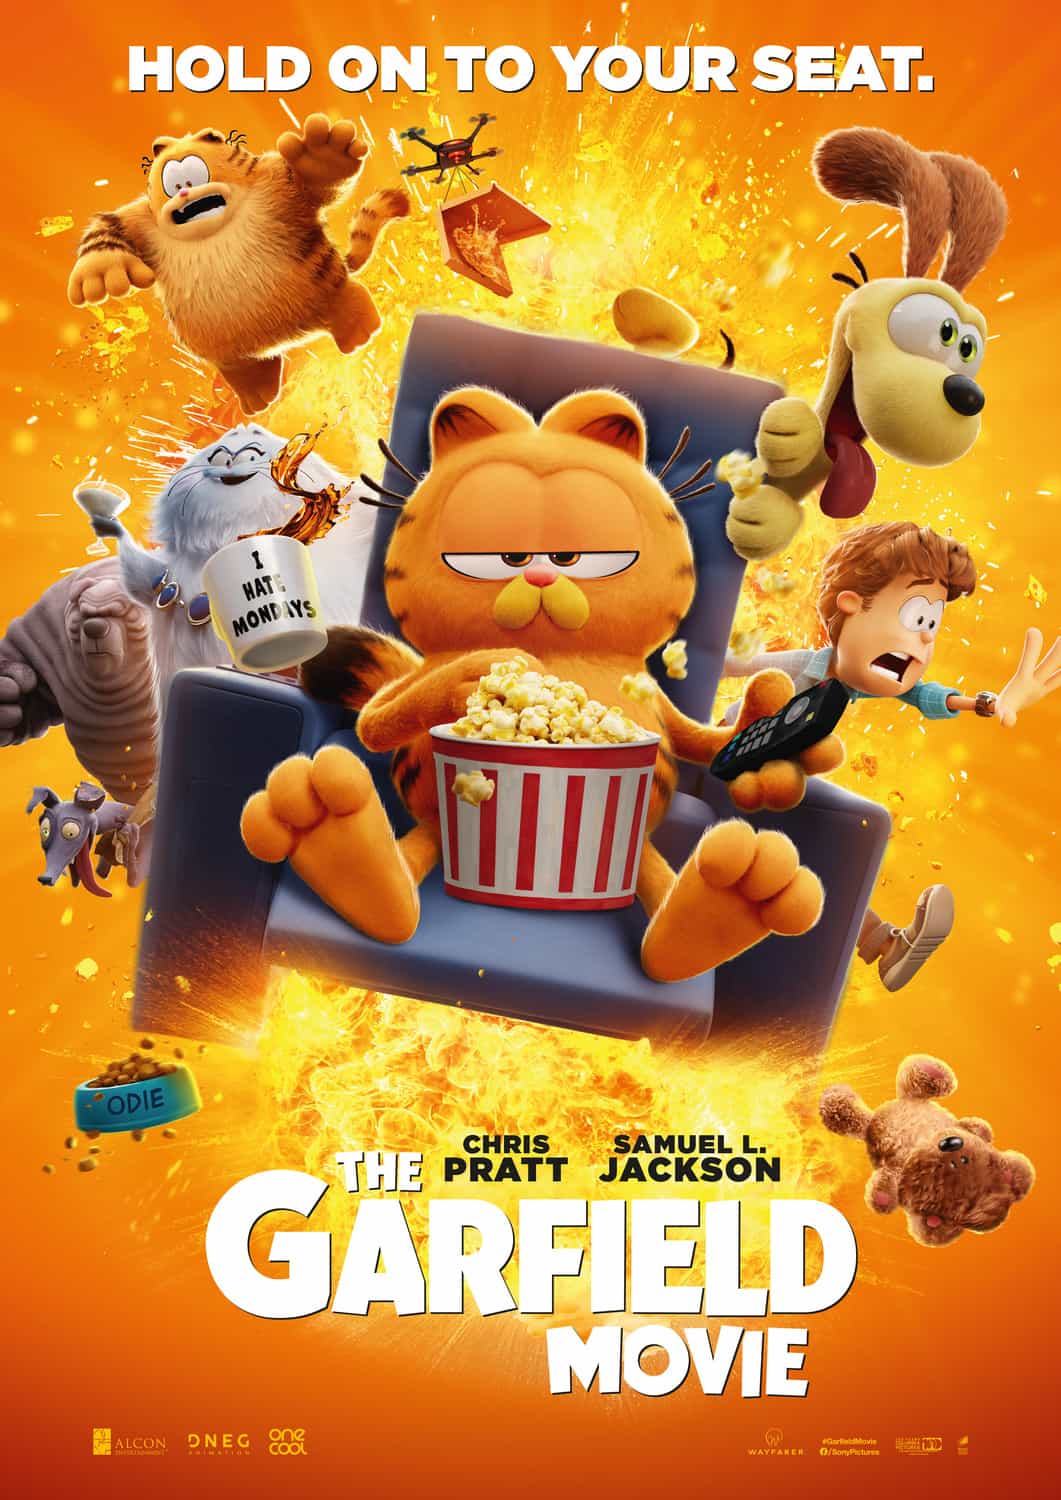 Check out the new trailer for upcoming movie Garfield which stars Hannah Waddingham and Chris Pratt - movie UK release date 24th May 2024 #garfield